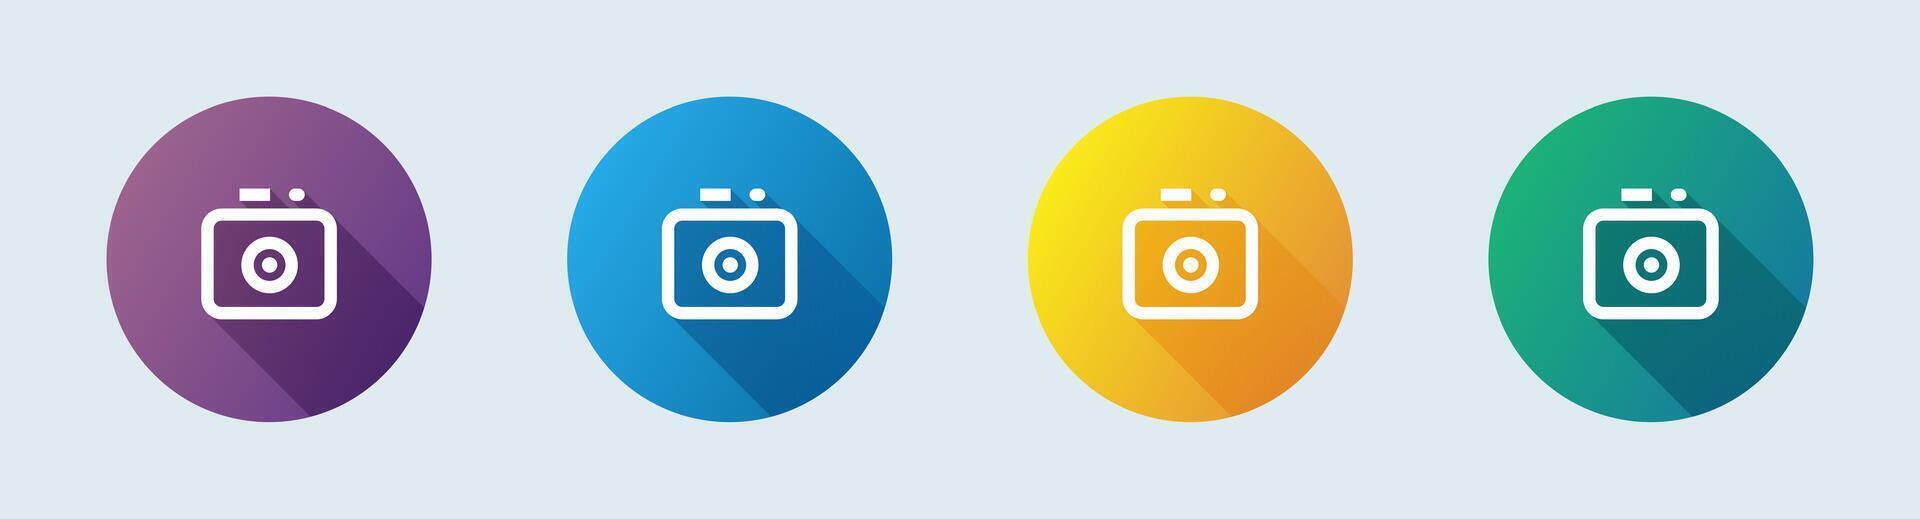 Camera line icon in flat design style. Capture buttons signs vector illustration.